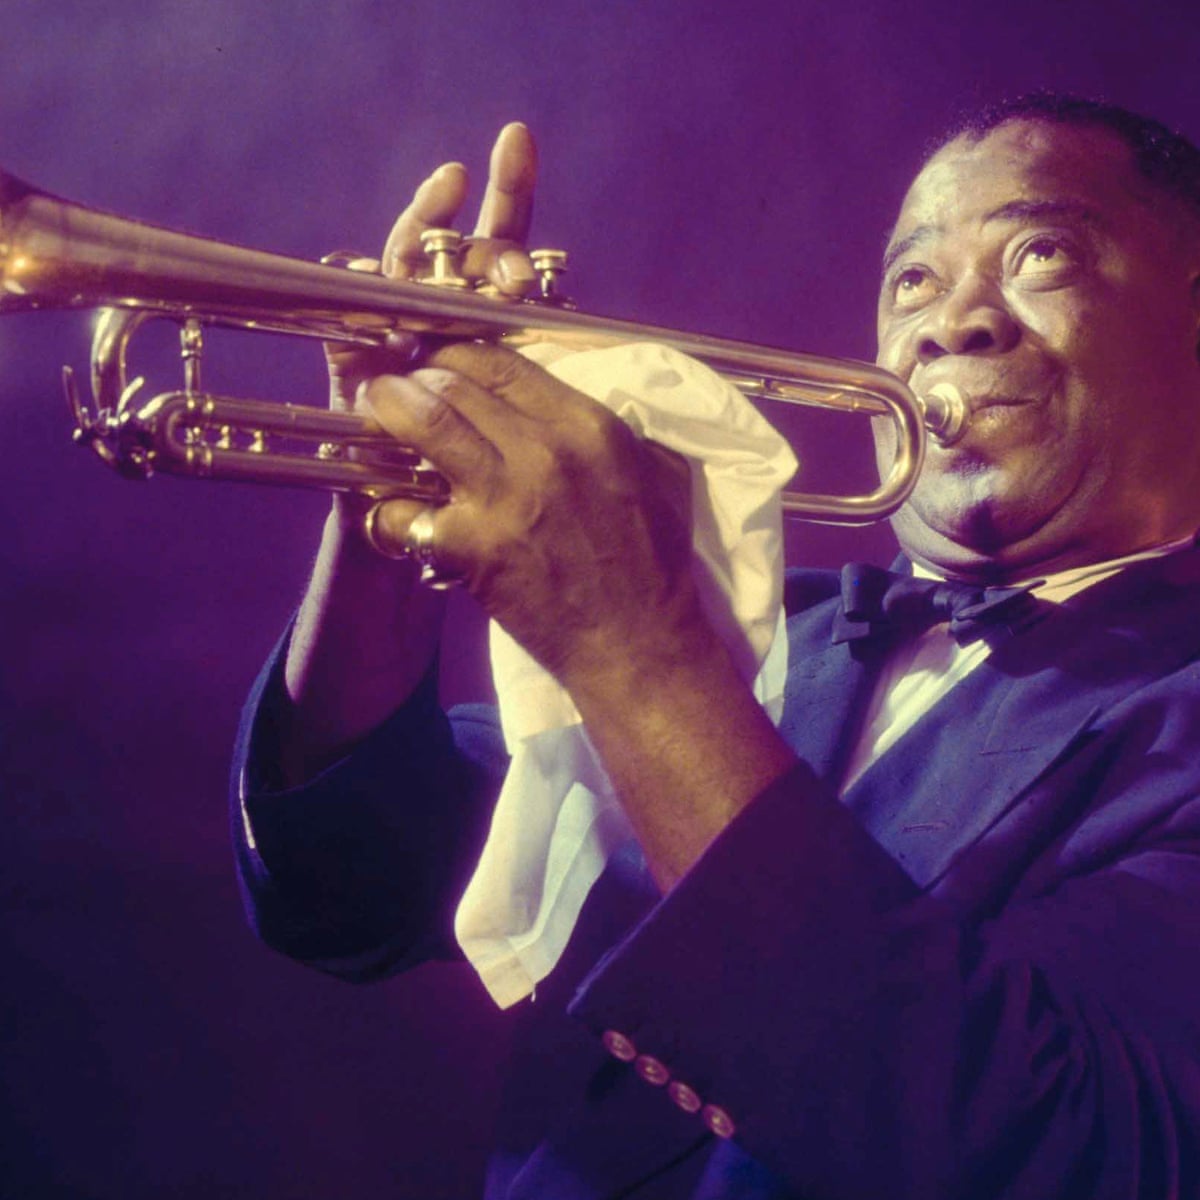 Not a wonderful world why louis armstrong was hated by so many louis armstrong the guardian